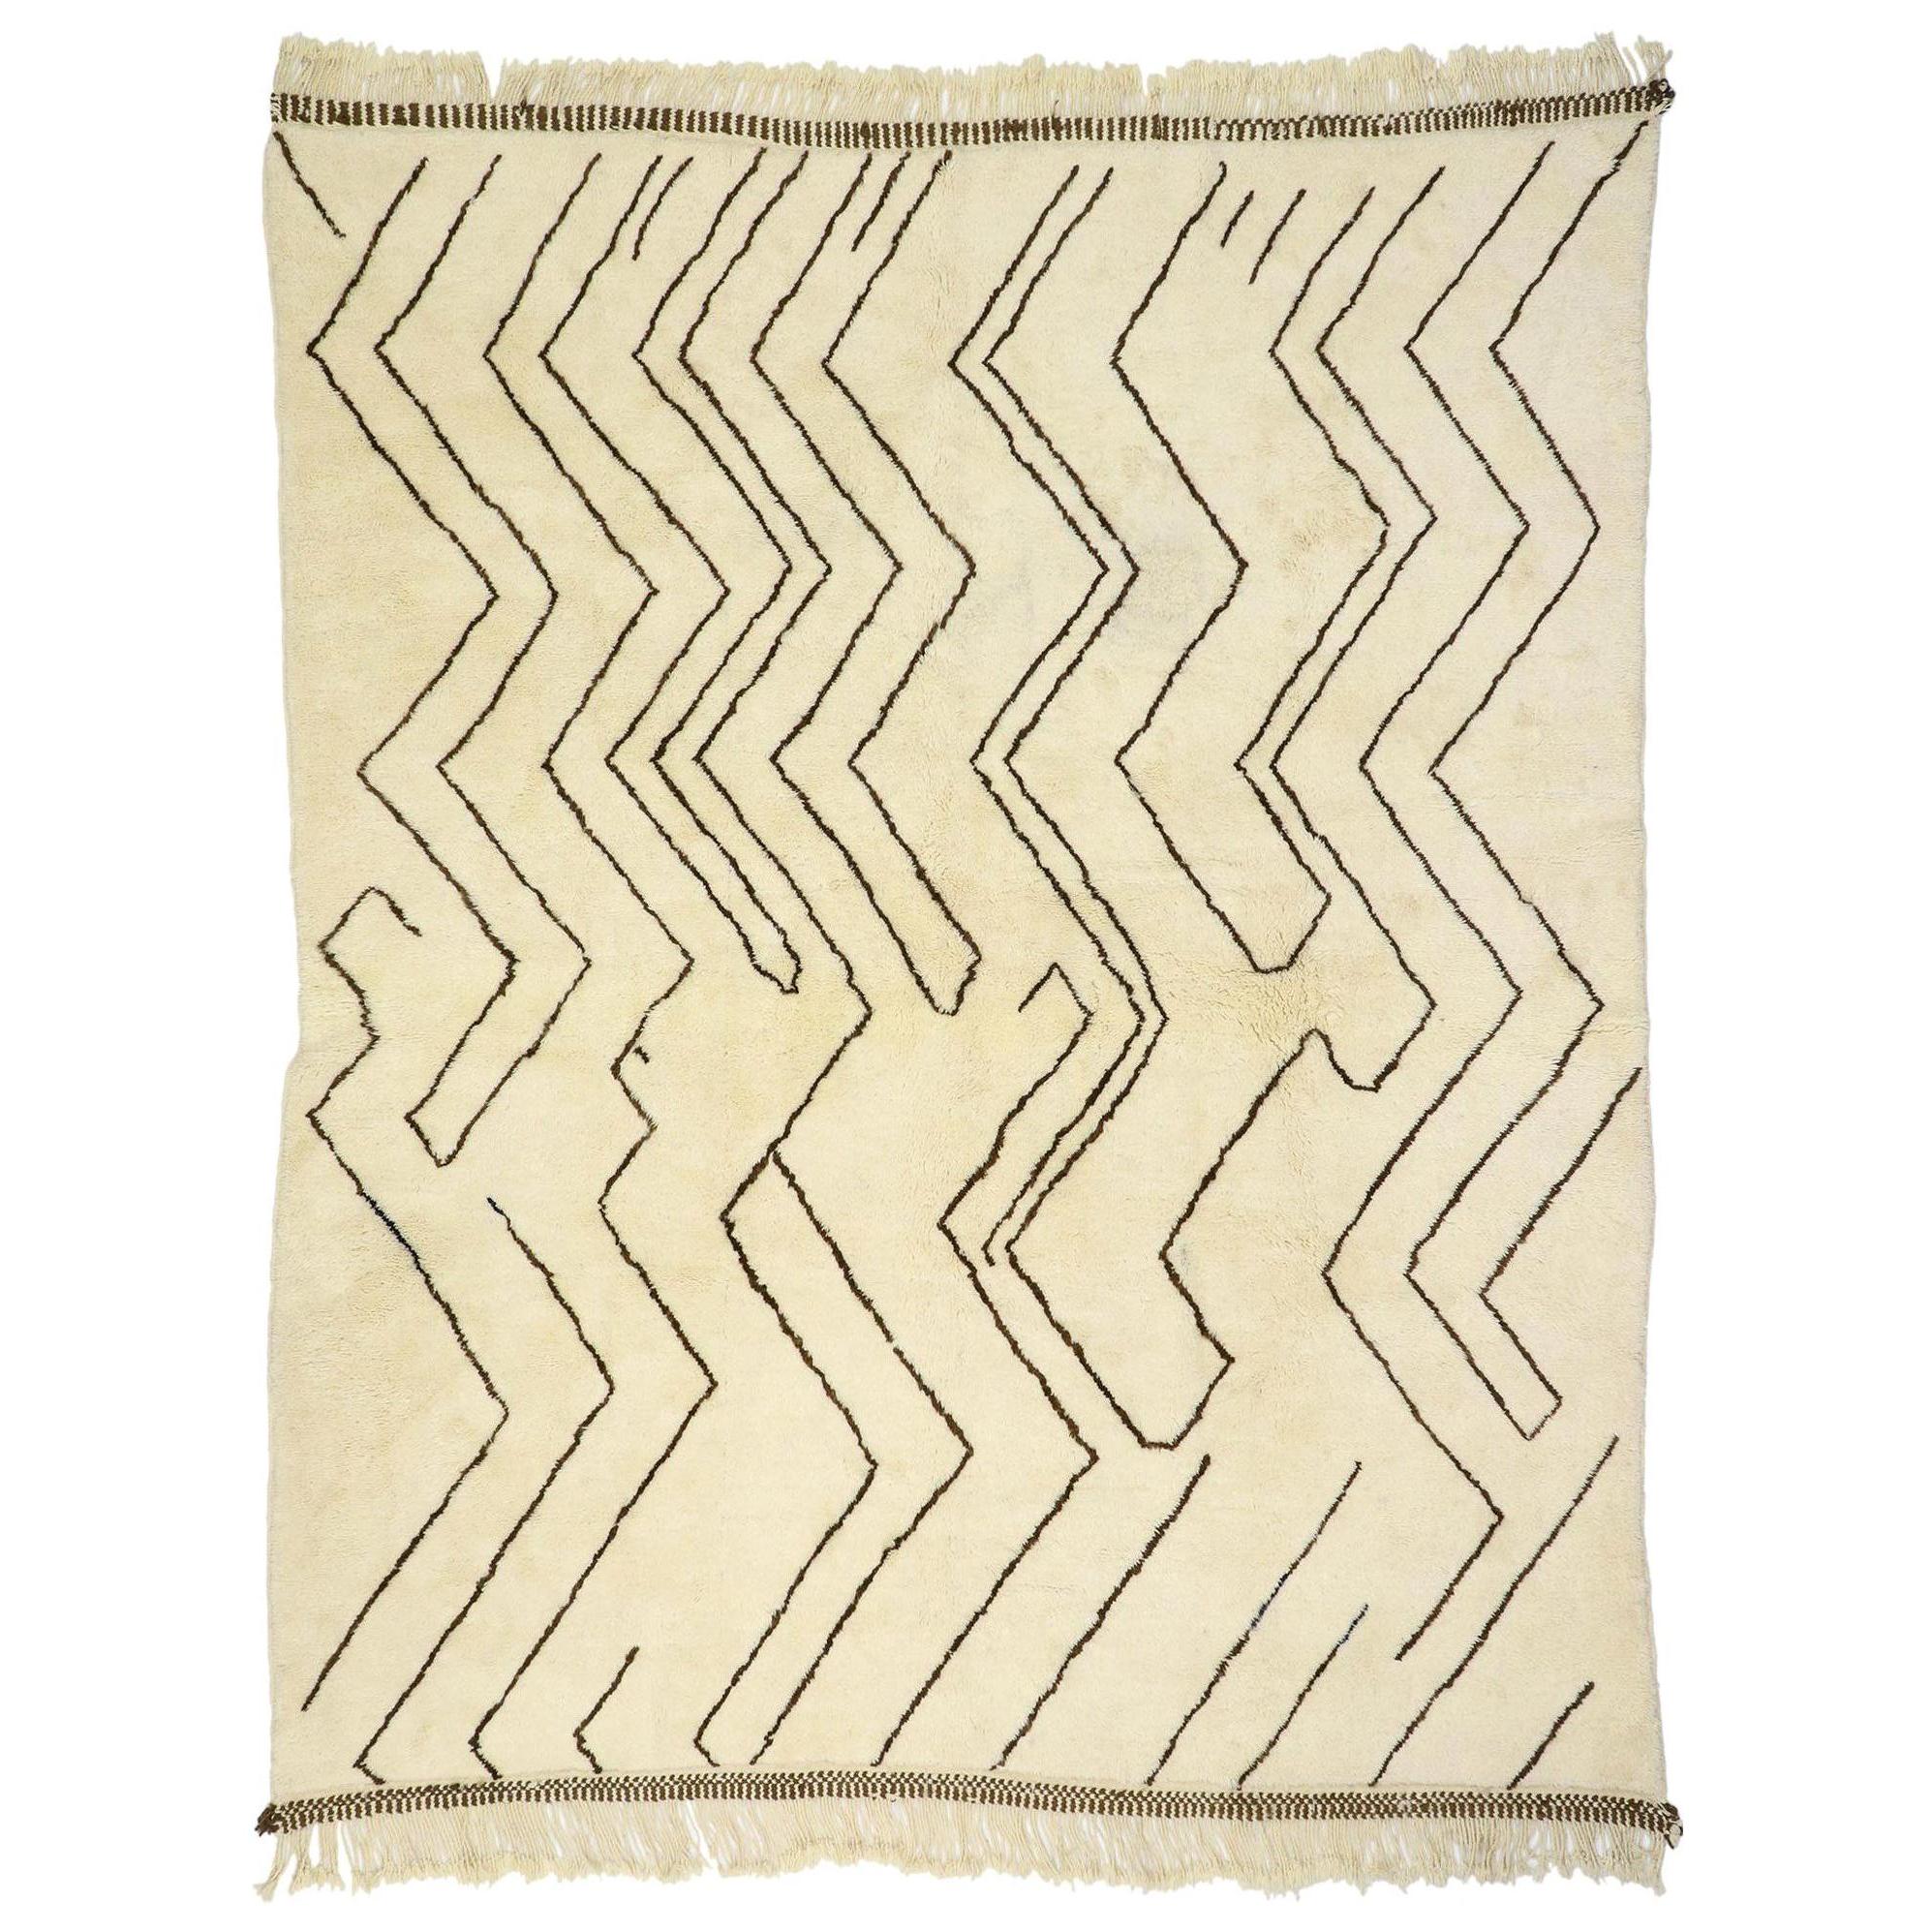 New Contemporary Berber Moroccan Rug with Organic Modern and Hygge Vibes